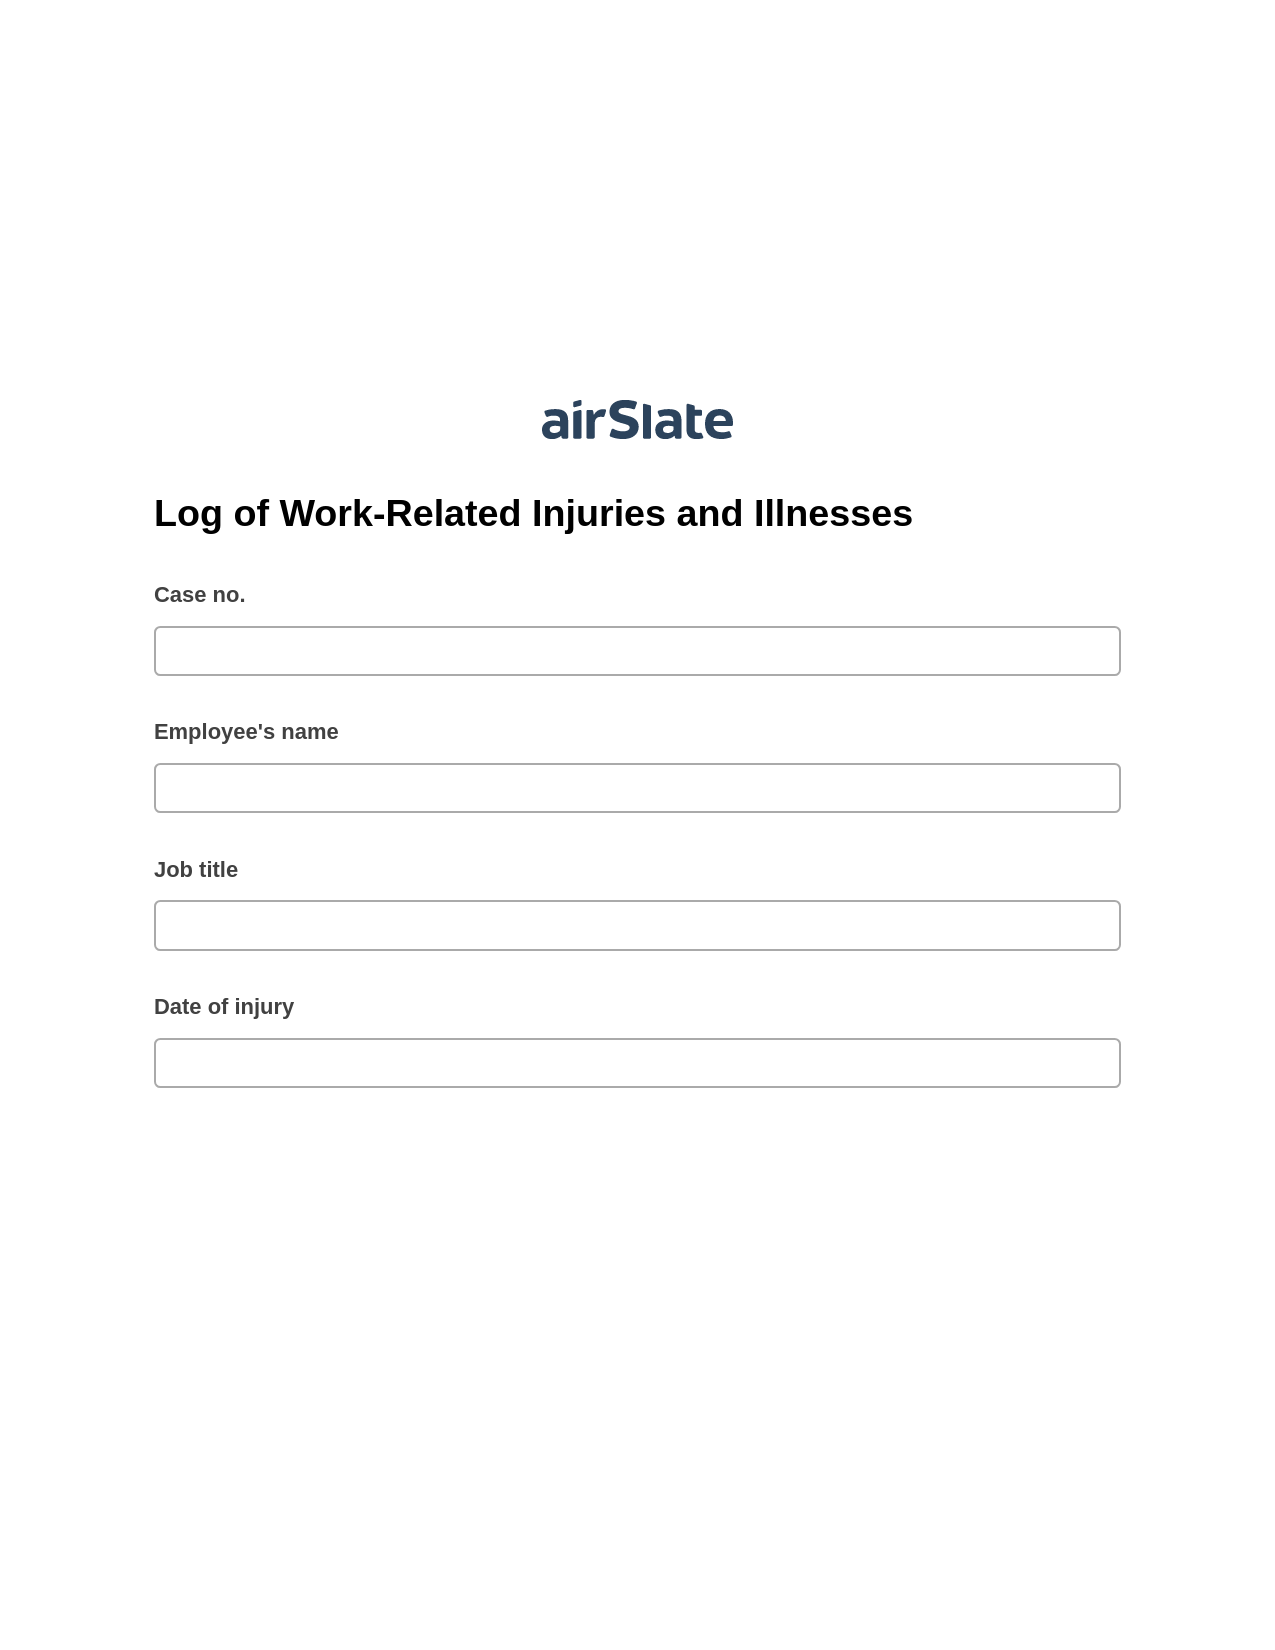 Log of Work-Related Injuries and Illnesses Pre-fill Dropdown from Airtable, Lock the slate bot, Post-finish Document Bot